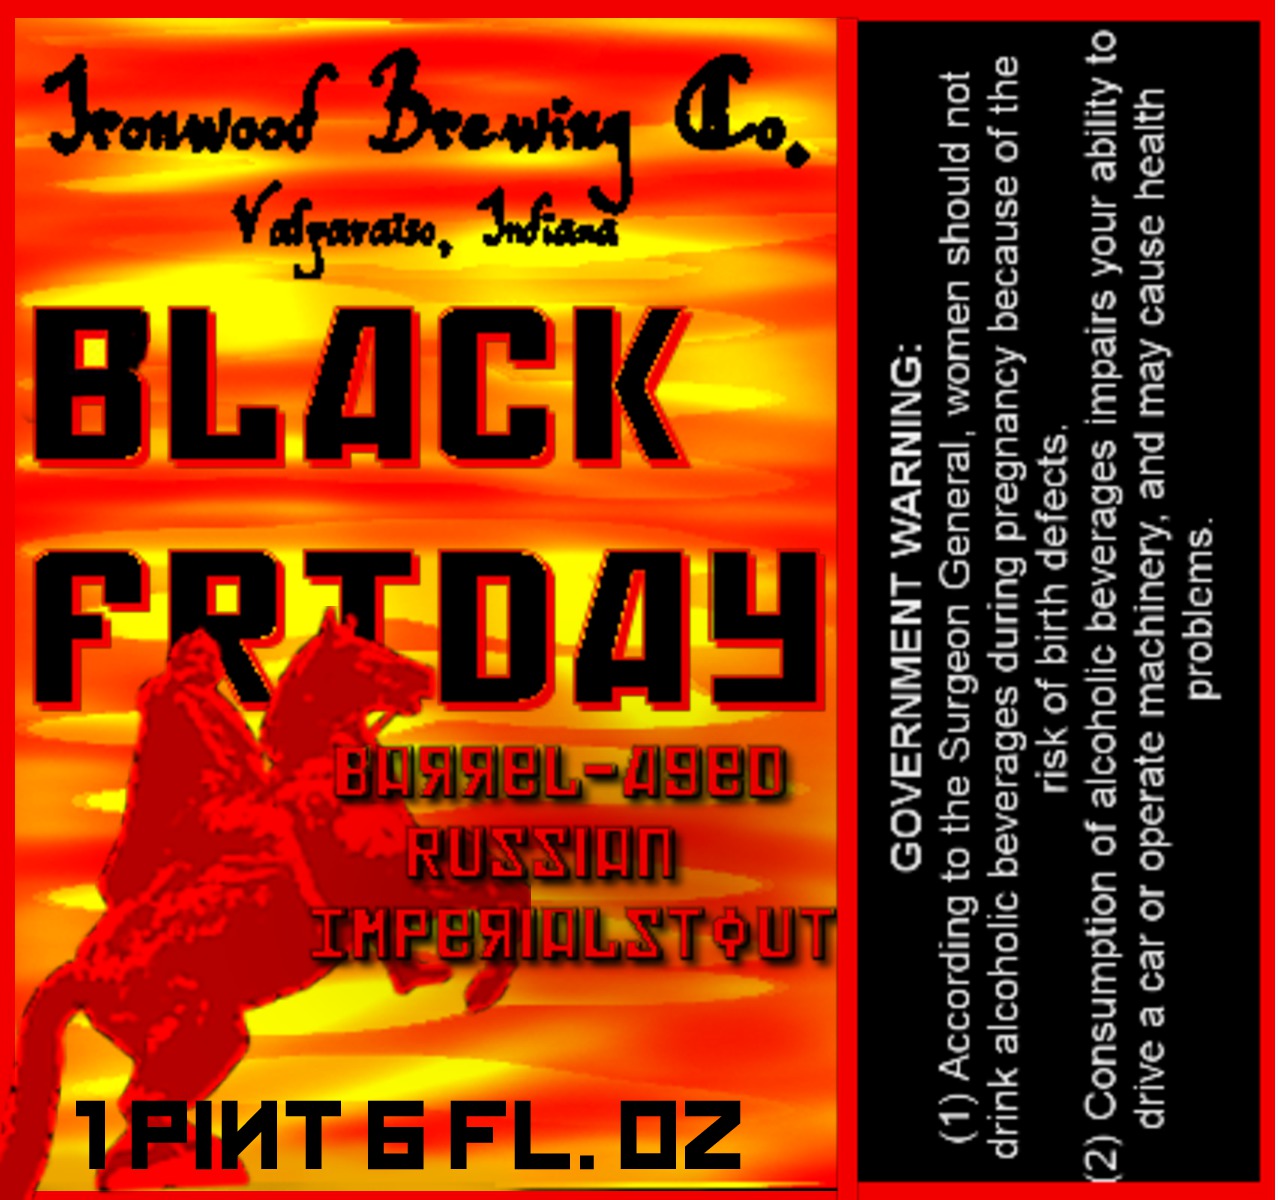 Ironwood Brewing Black Friday Barrel Aged Russian Imperial Stout